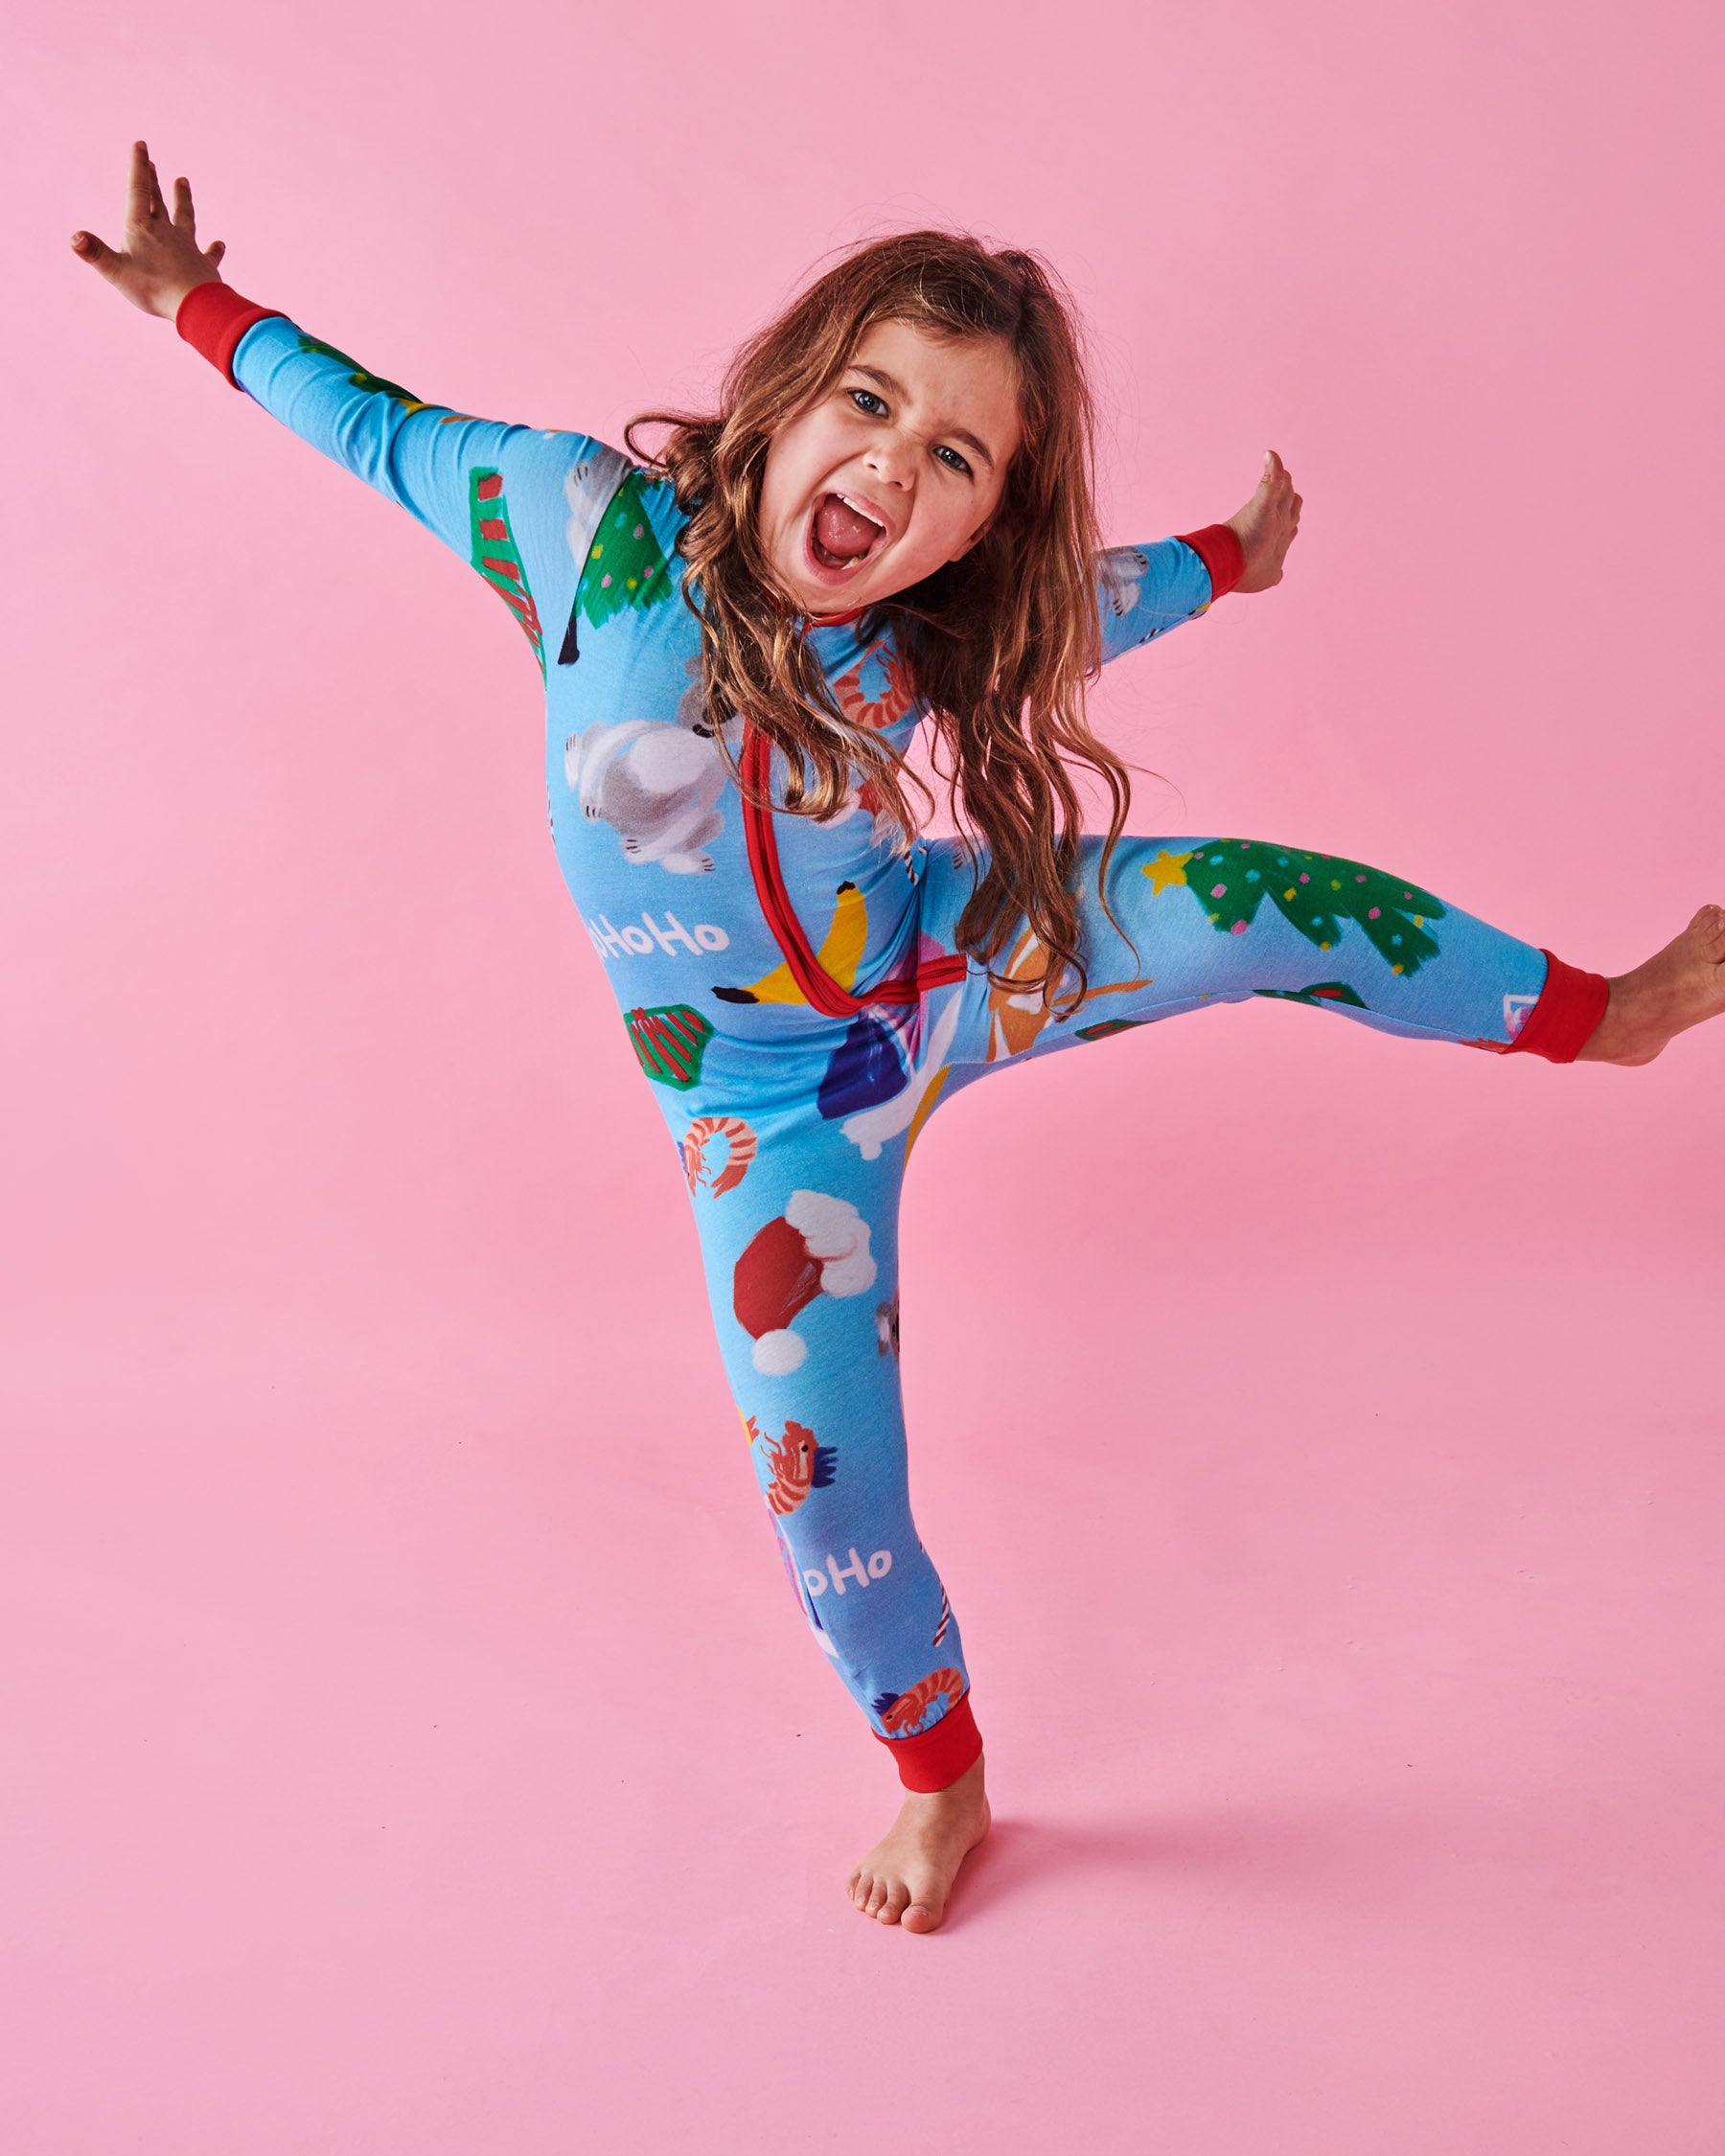 N A T O P I A on Instagram: Kids spreading the festive spirit in Natopia's  Christmas leggings – because happiness looks best on little legs! 😃🎄  Little styles, big smiles! 😄